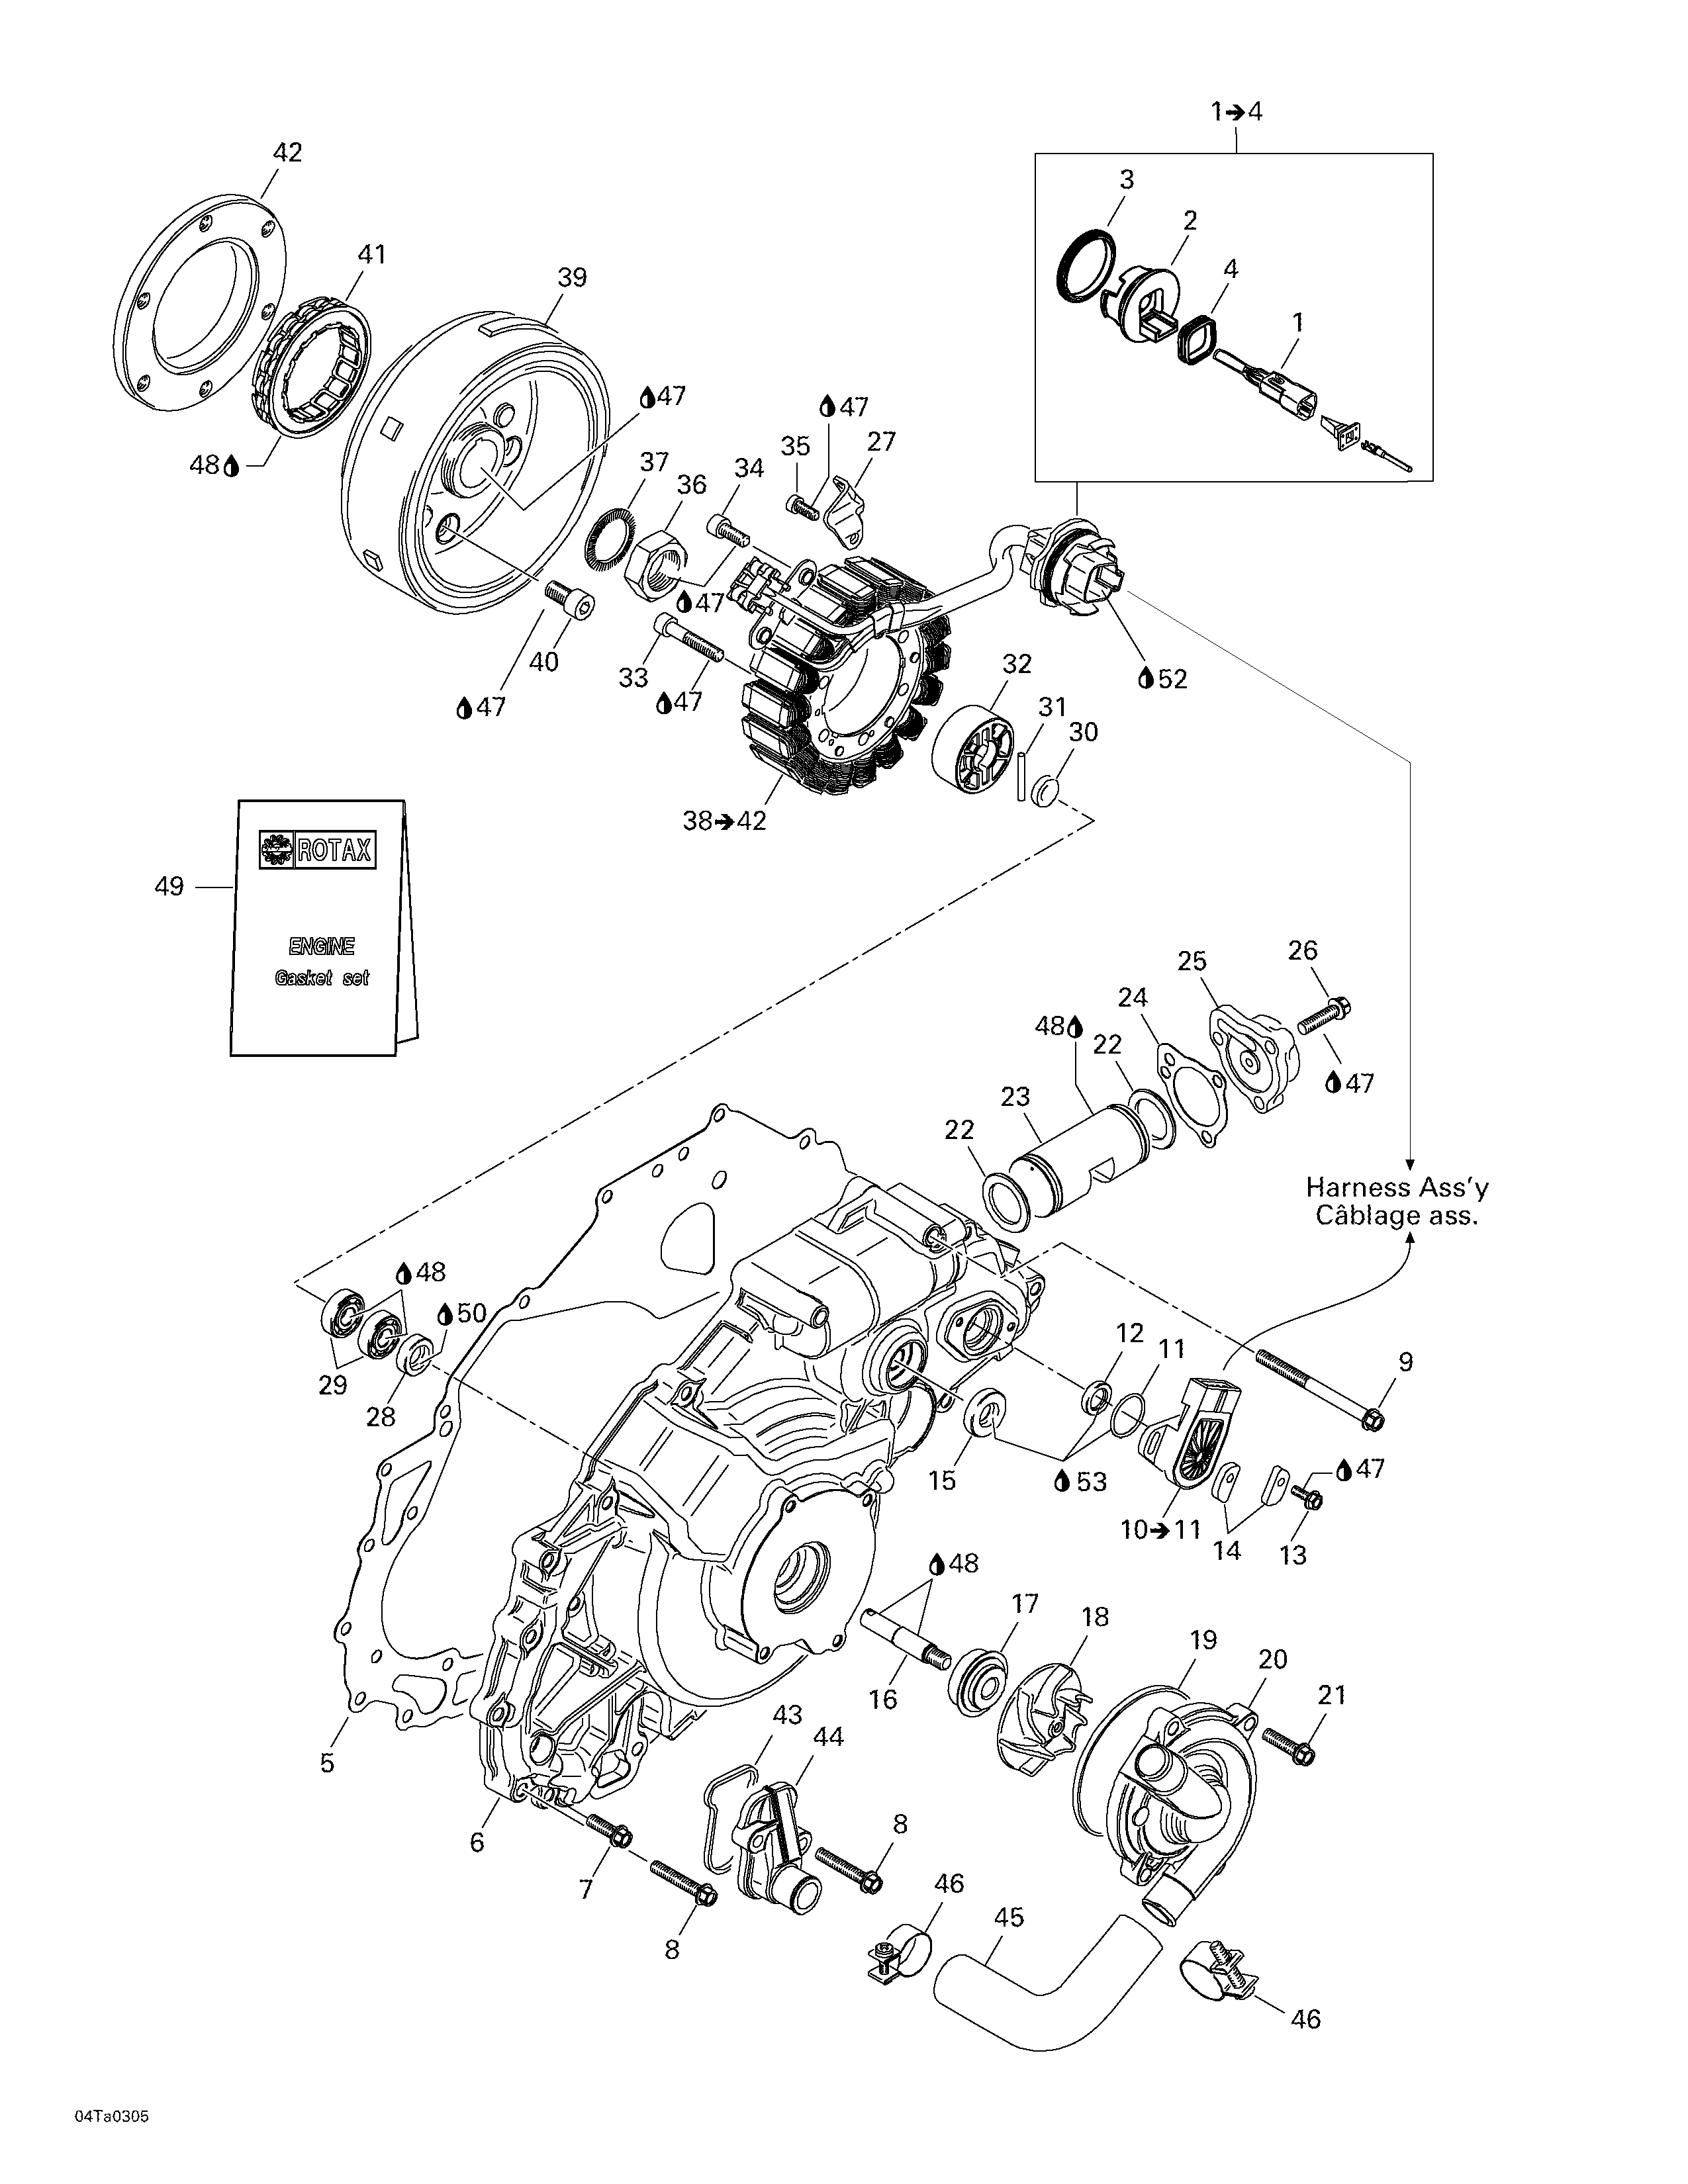 Ignition And Water Pump